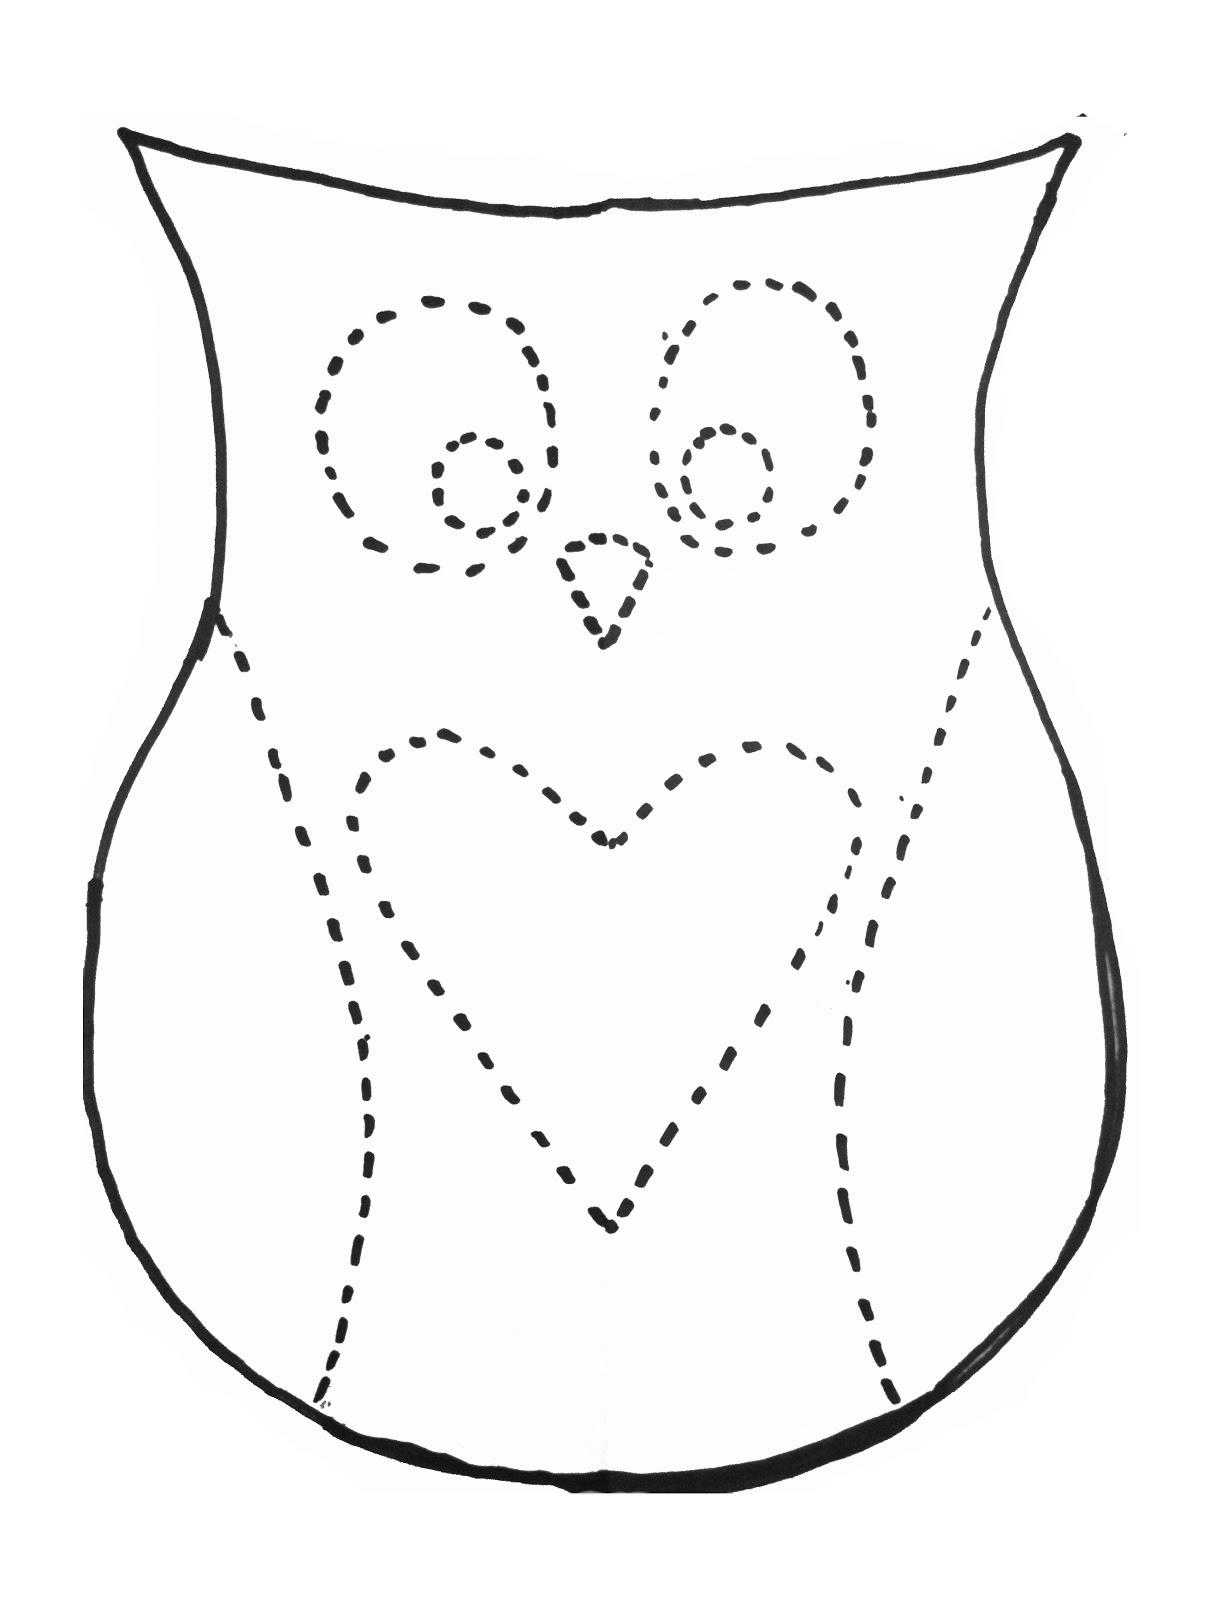 Coloring The owl contour. Category The contours for cutting out the birds. Tags:  owl.